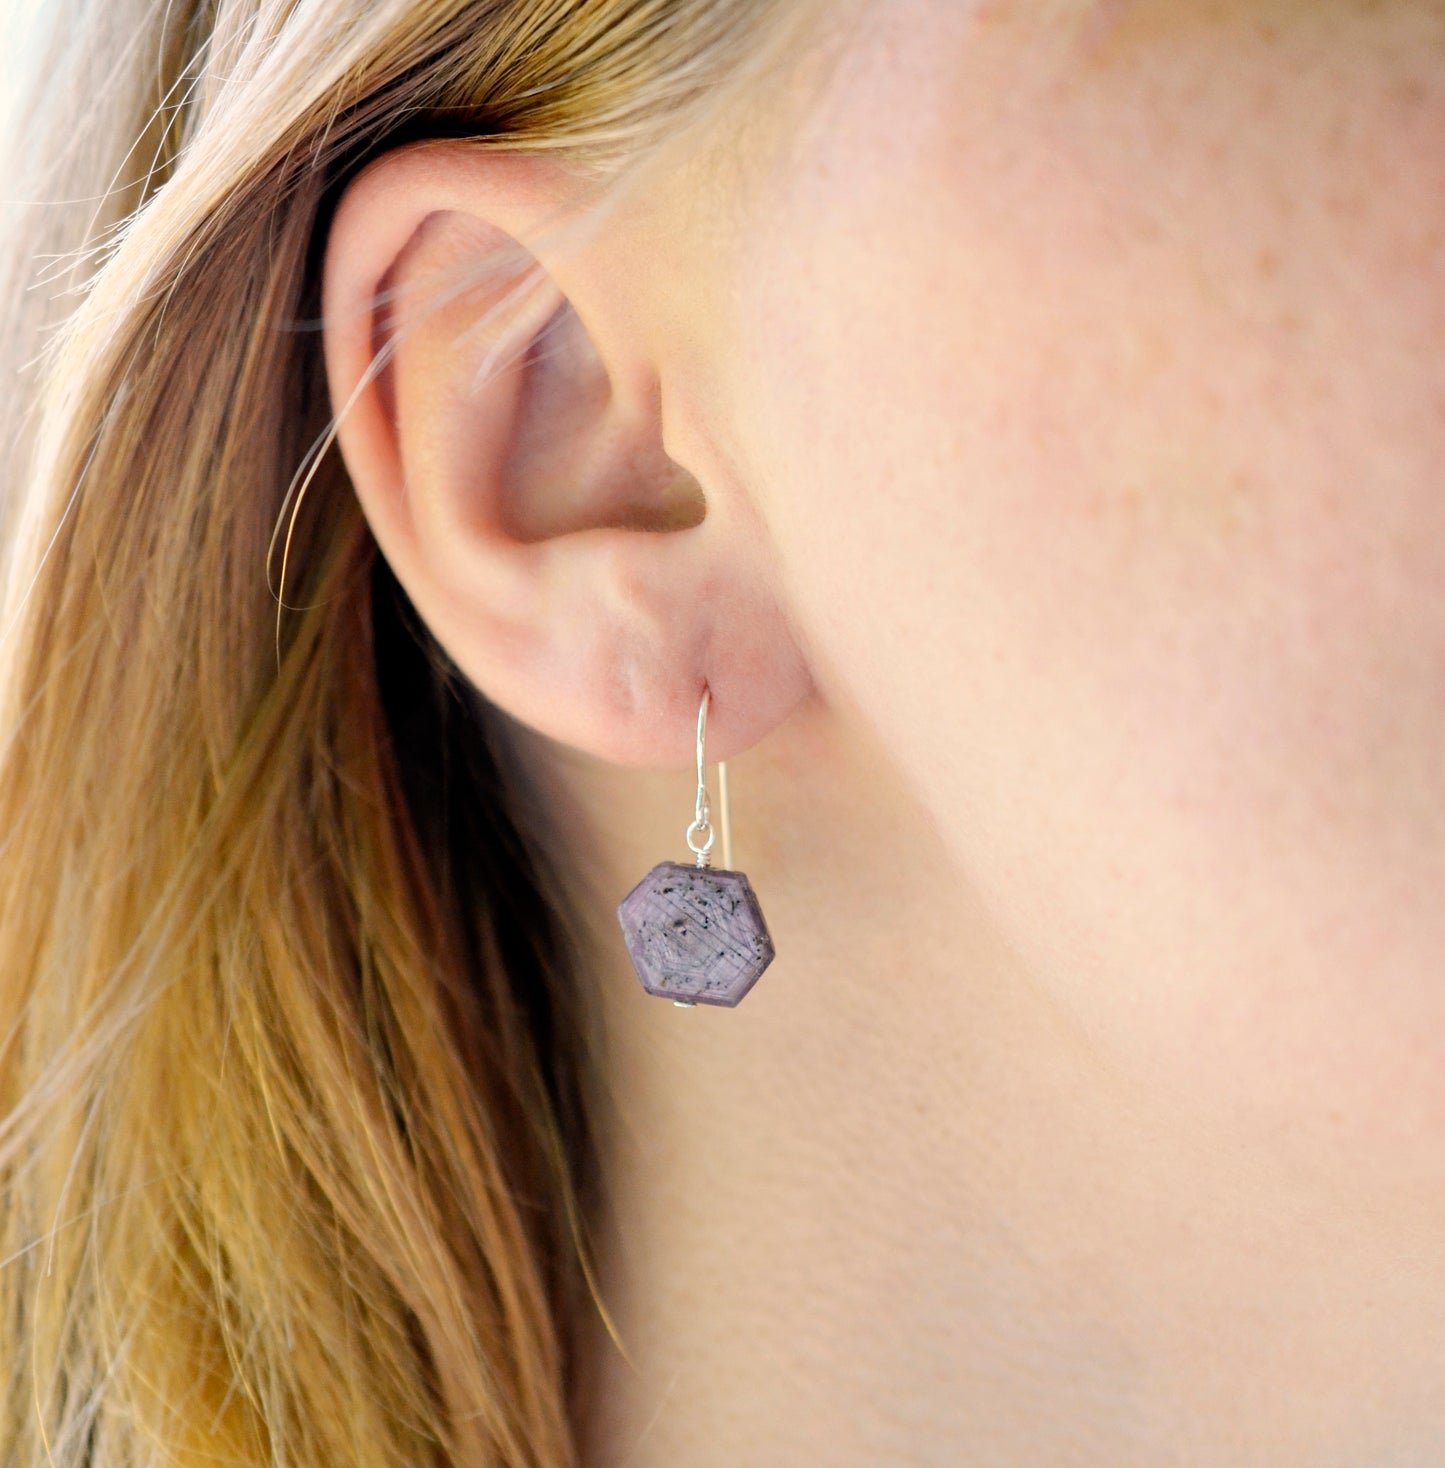 Purple-pink raw ruby stones suspended from sterling silver earwires. The stones are rough and in their natural hexagonal shape.  Modeled image.